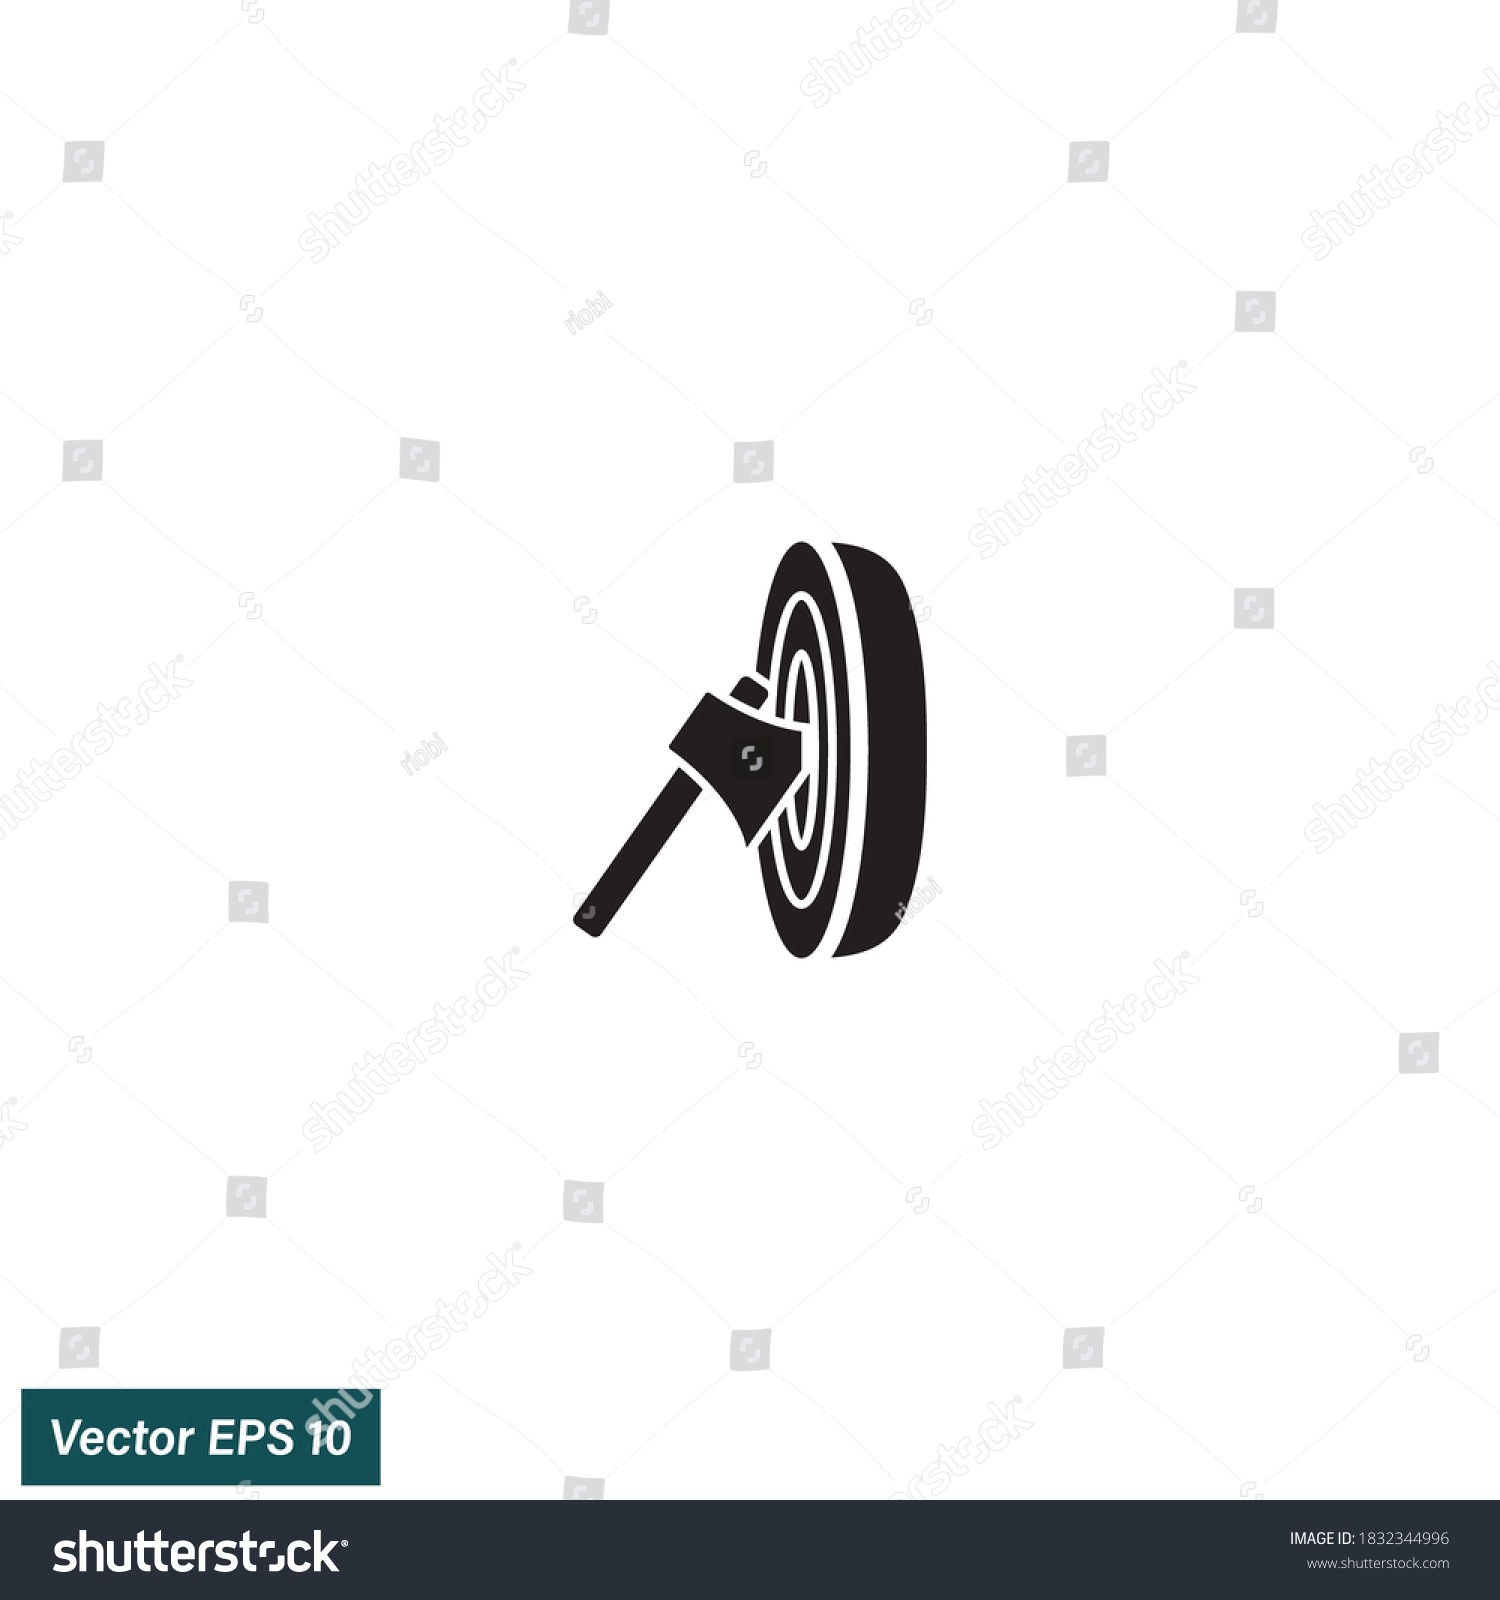 SVG of throwing axe icon illustration simple design element vector logo template svg